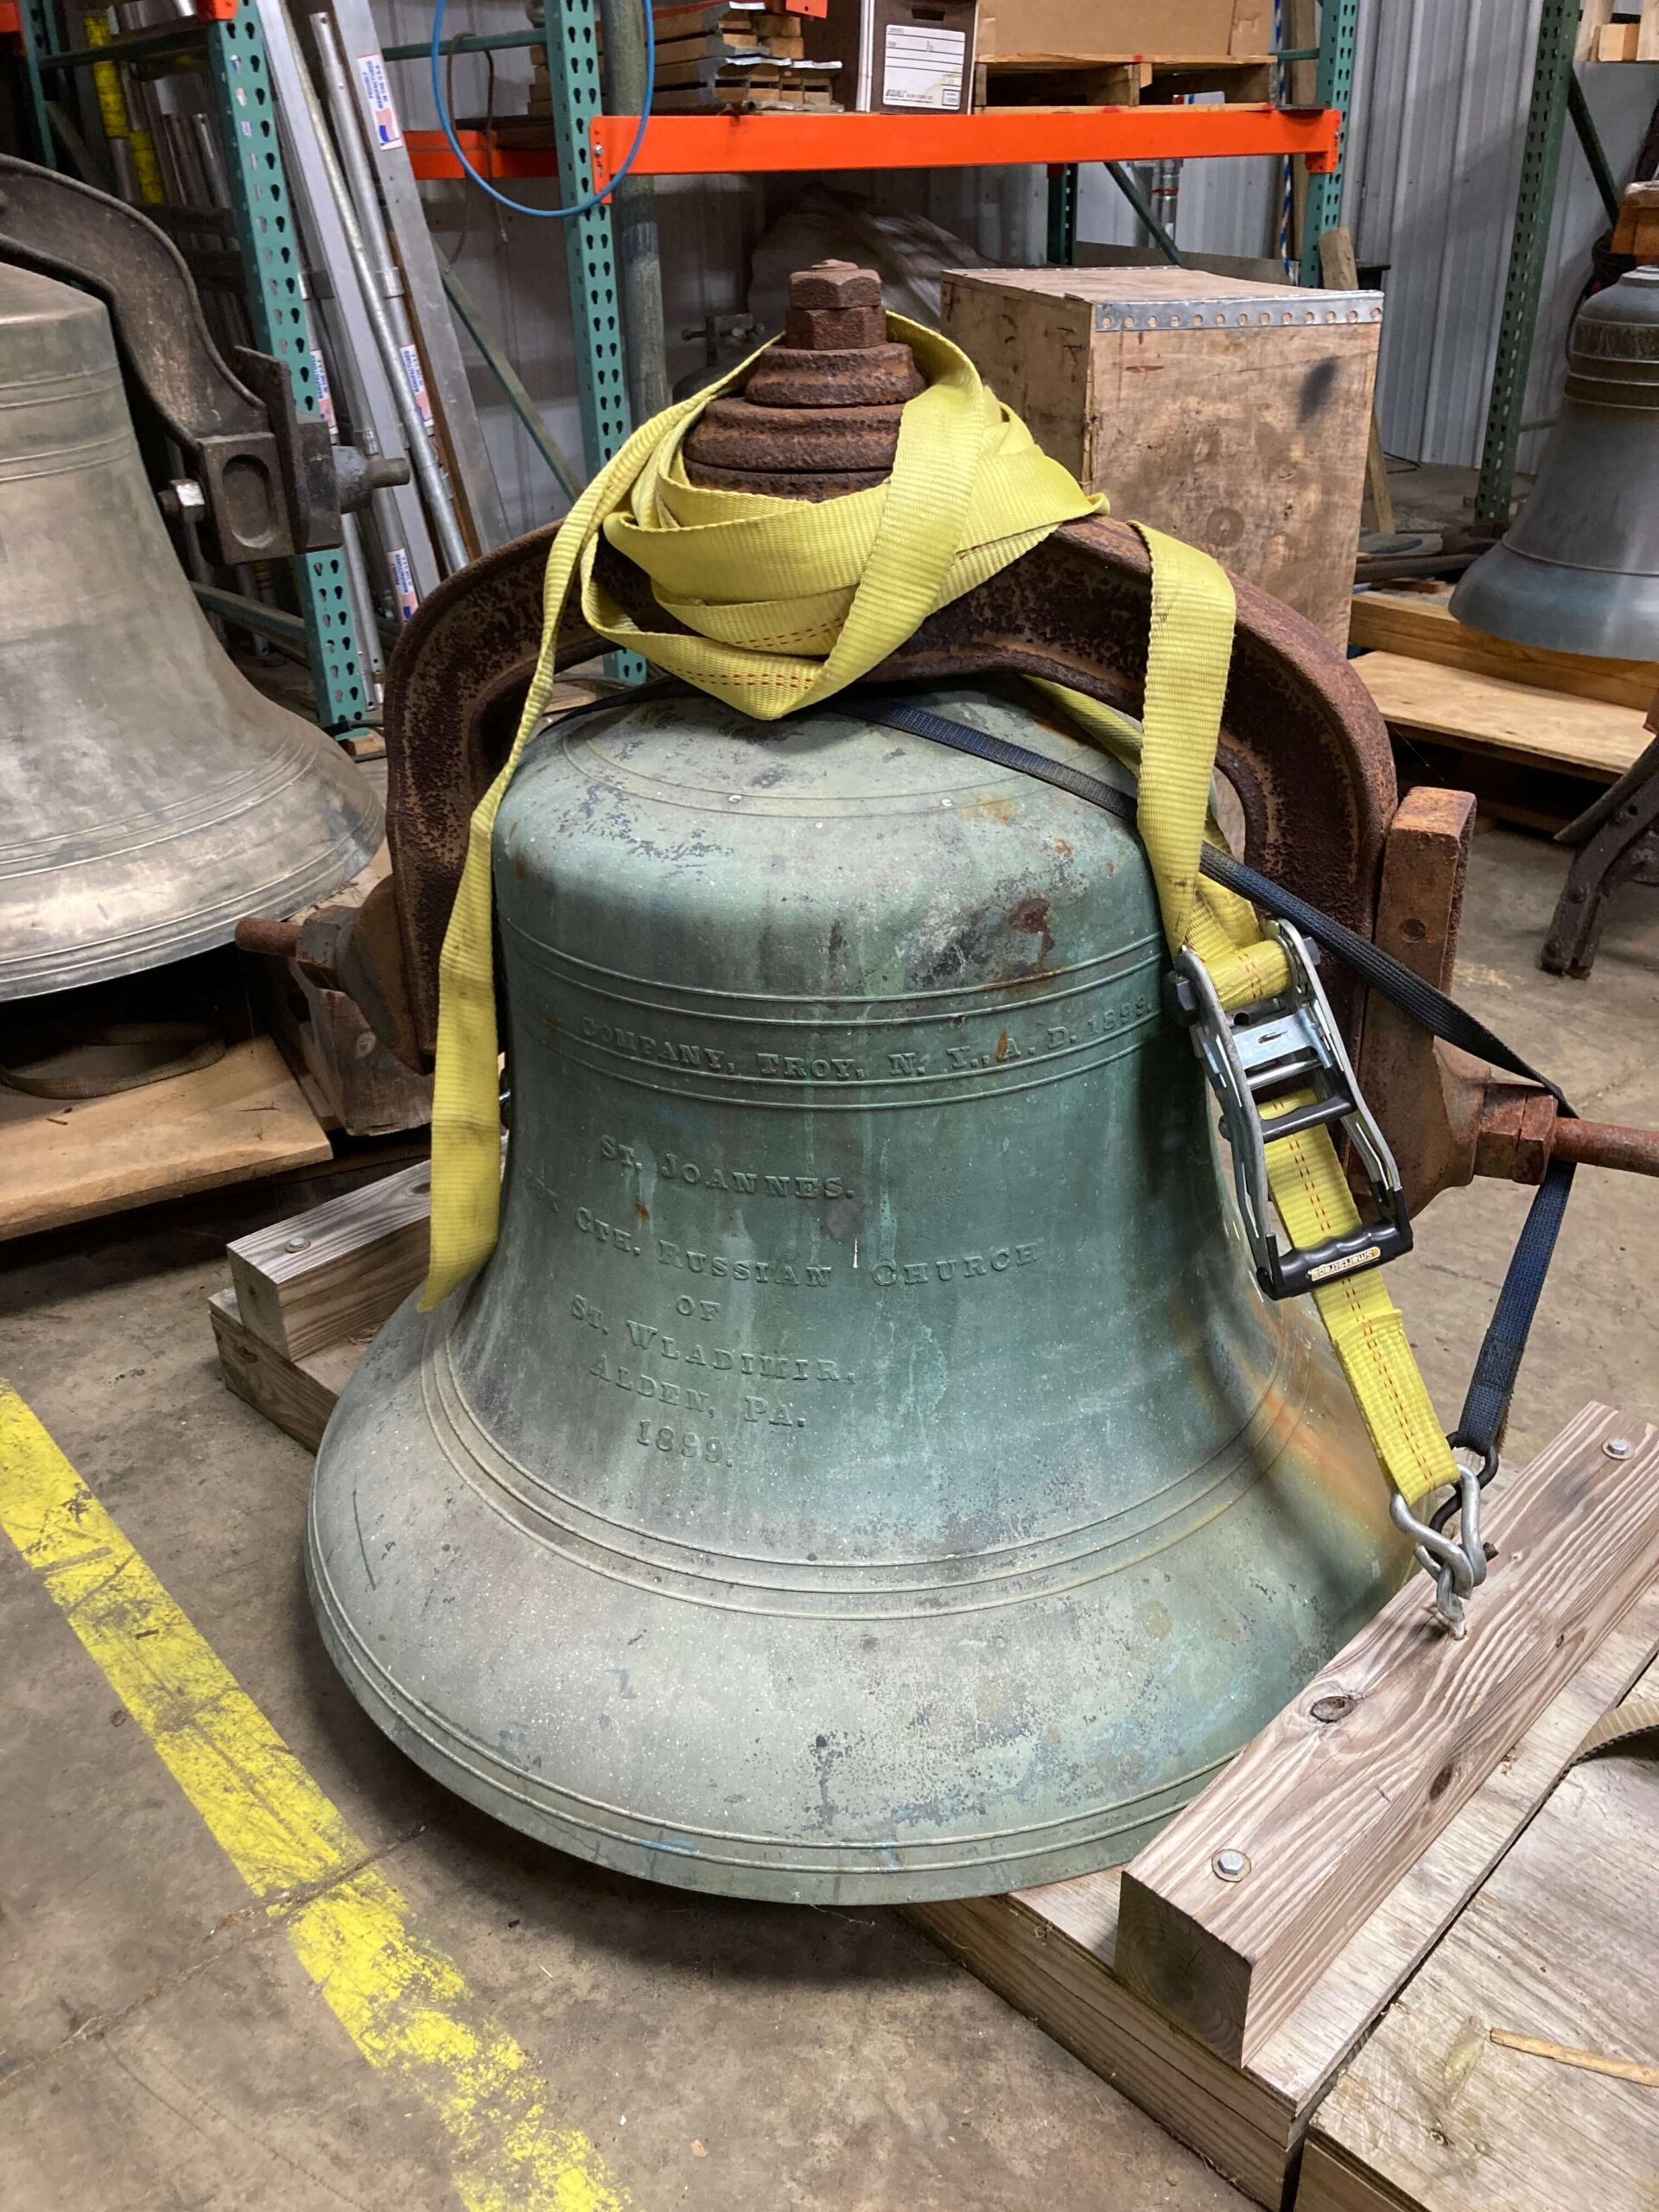 Pre-Owned church bells for sale in restored or original condition